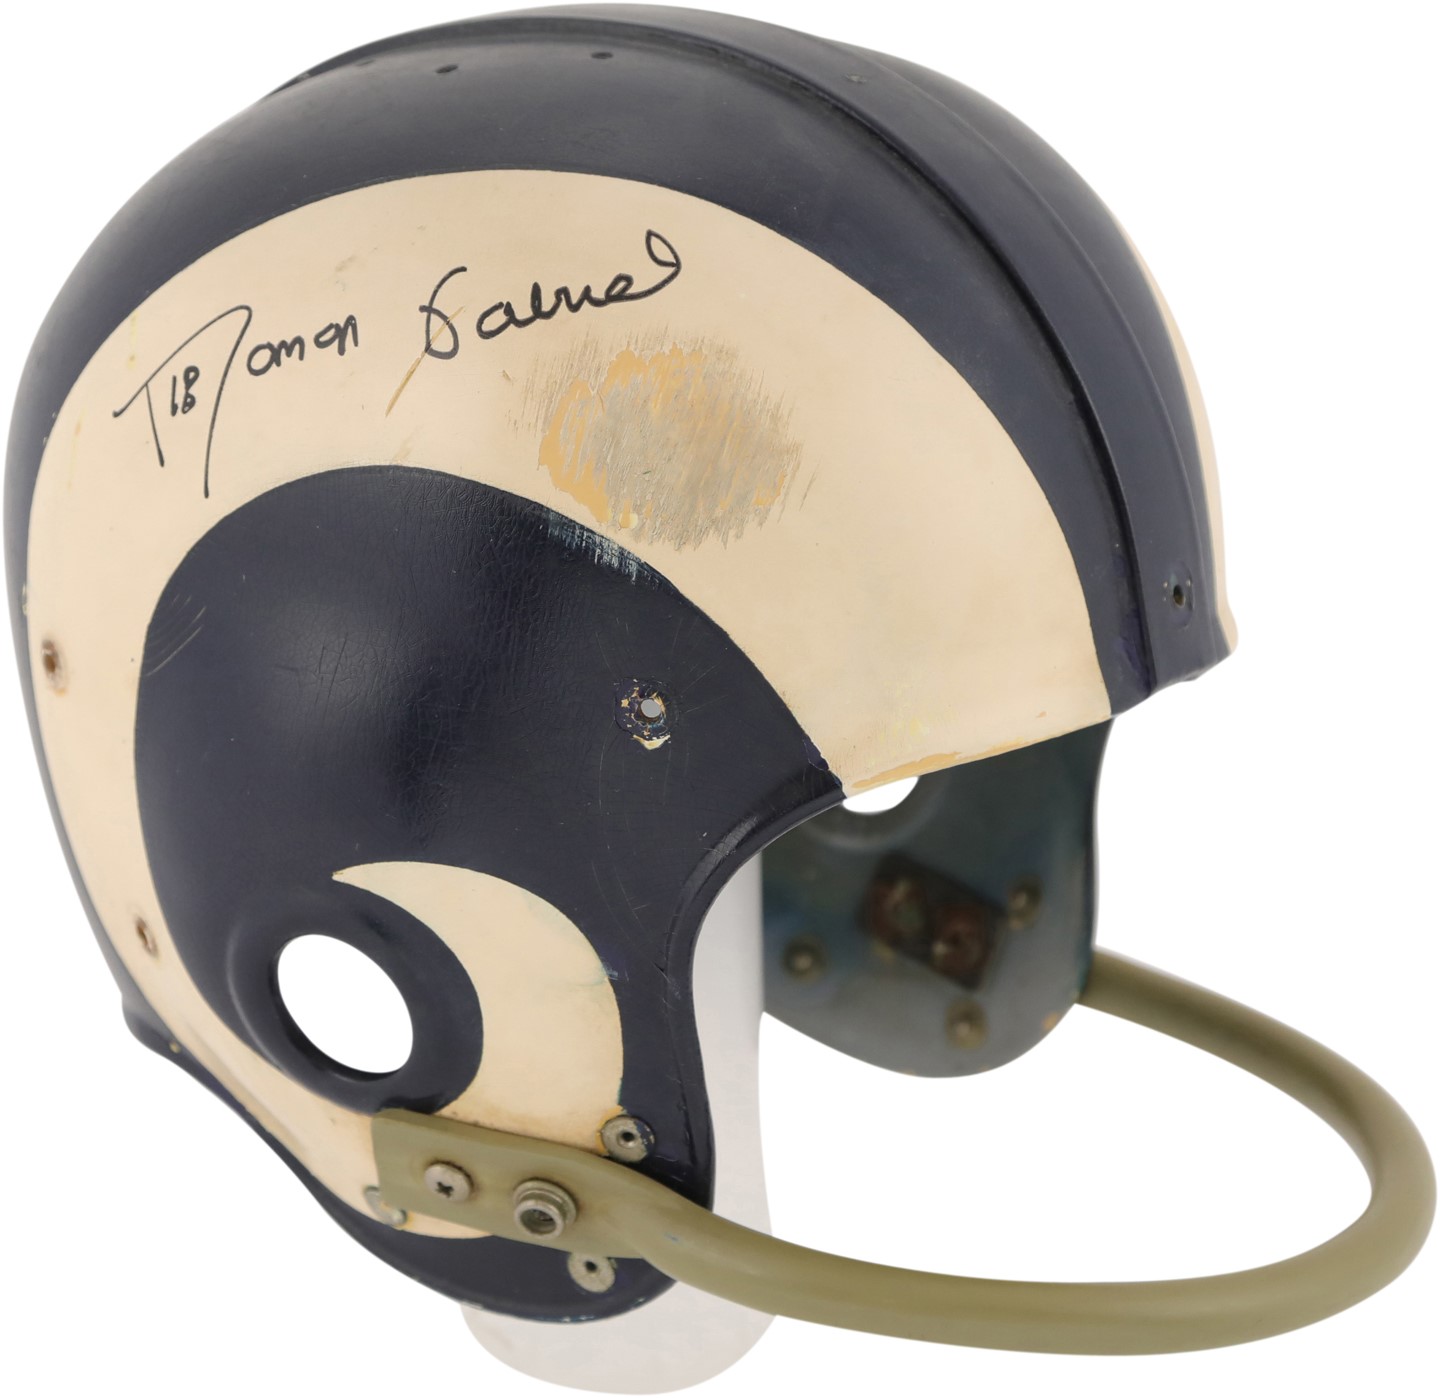 - The Concussion Helmet - Roman Gabriel 1970 Los Angeles Signed Game Used Helmet - Used in Government Hearings (Photo-Matched)